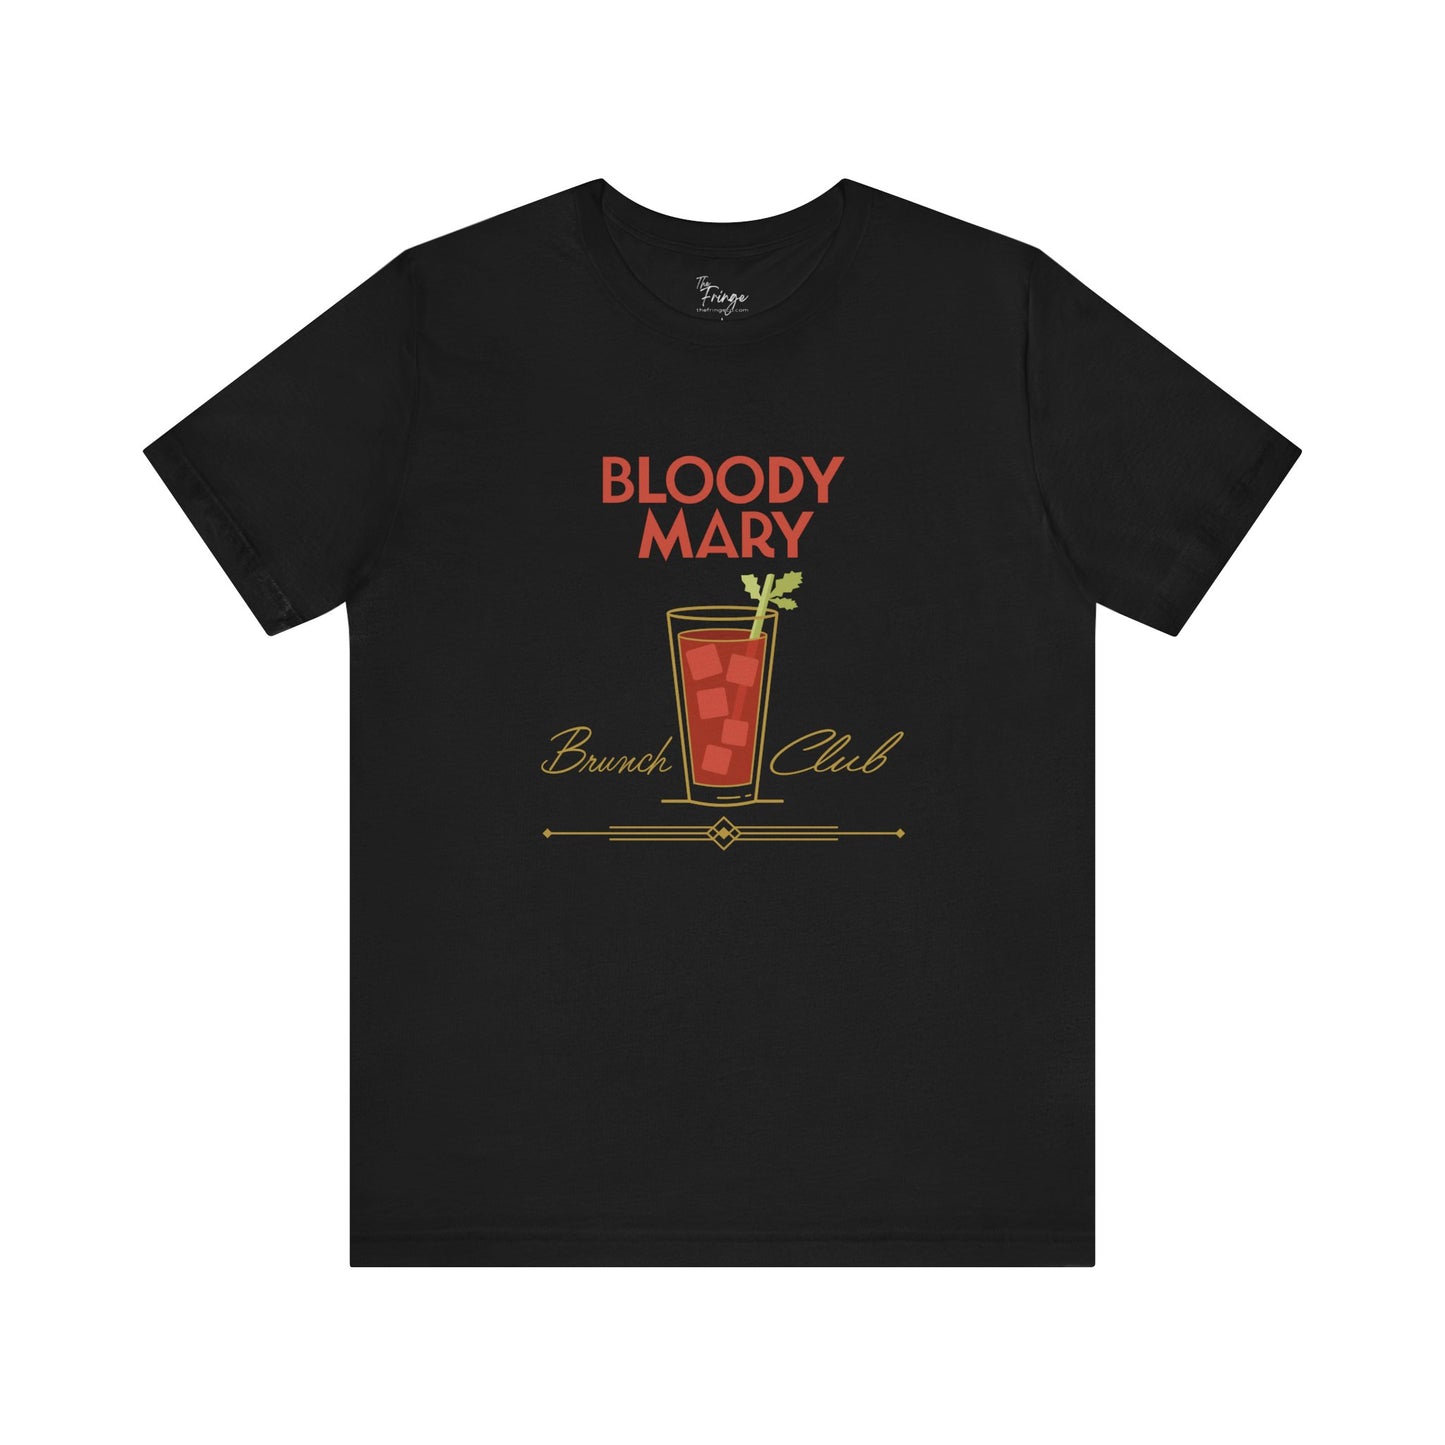 Bloody Mary Brunch Club Graphic Tee